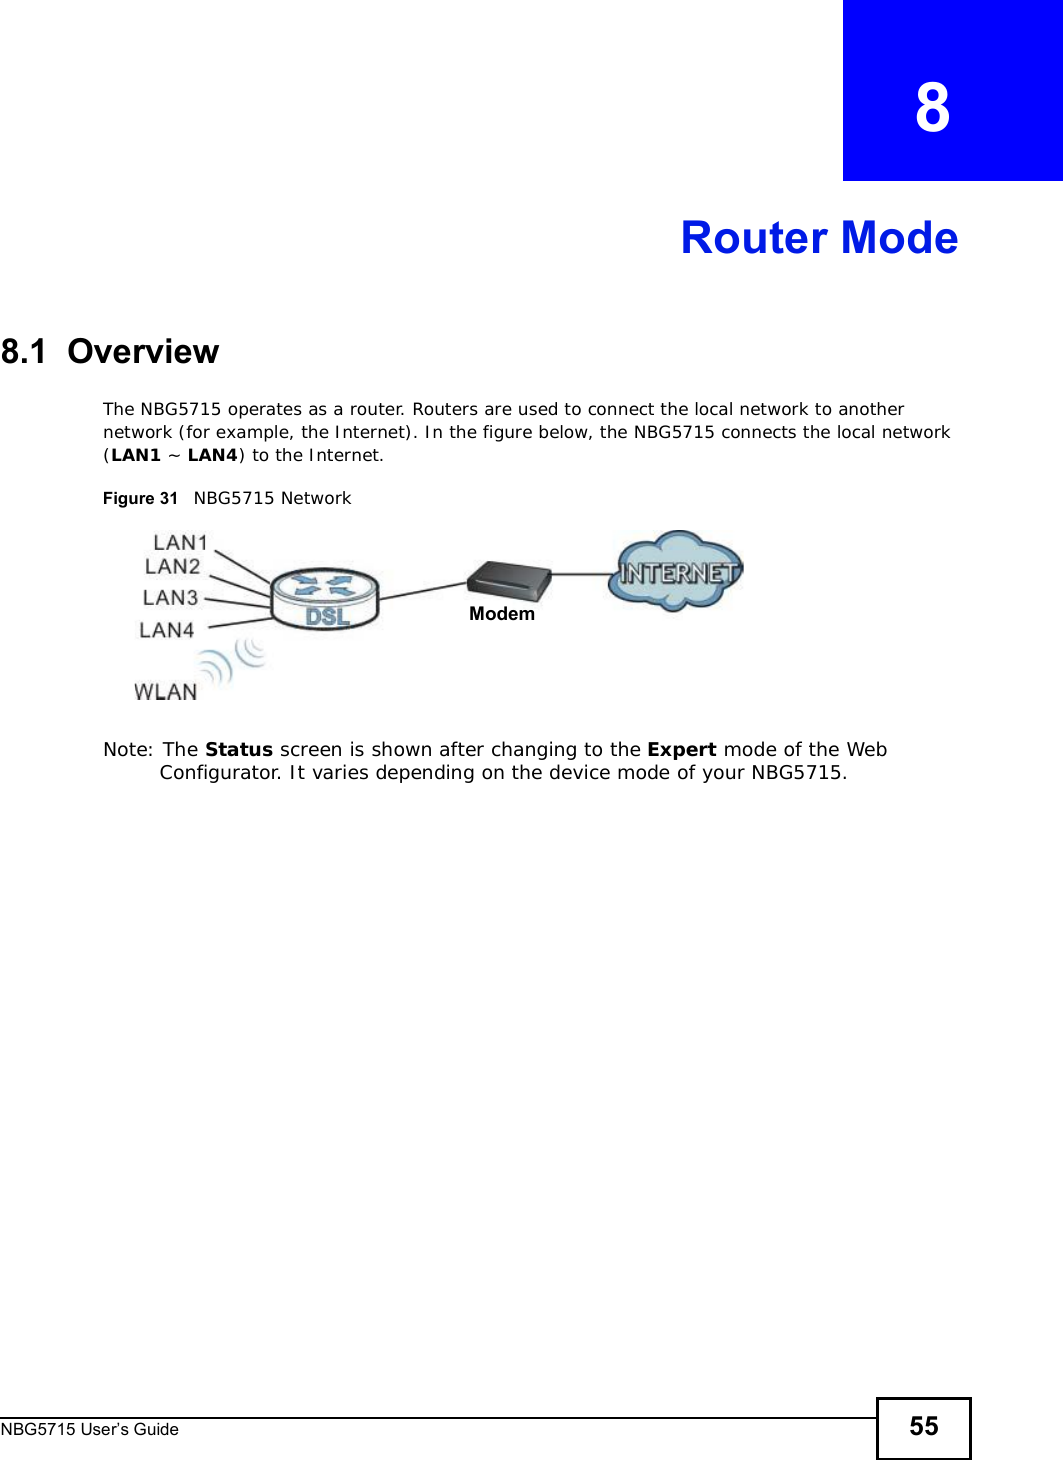 NBG5715 User’s Guide 55CHAPTER   8Router Mode8.1  OverviewThe NBG5715 operates as a router. Routers are used to connect the local network to another network (for example, the Internet). In the figure below, the NBG5715 connects the local network (LAN1 ~ LAN4) to the Internet.Figure 31   NBG5715 NetworkNote: The Status screen is shown after changing to the Expert mode of the Web Configurator. It varies depending on the device mode of your NBG5715.Modem